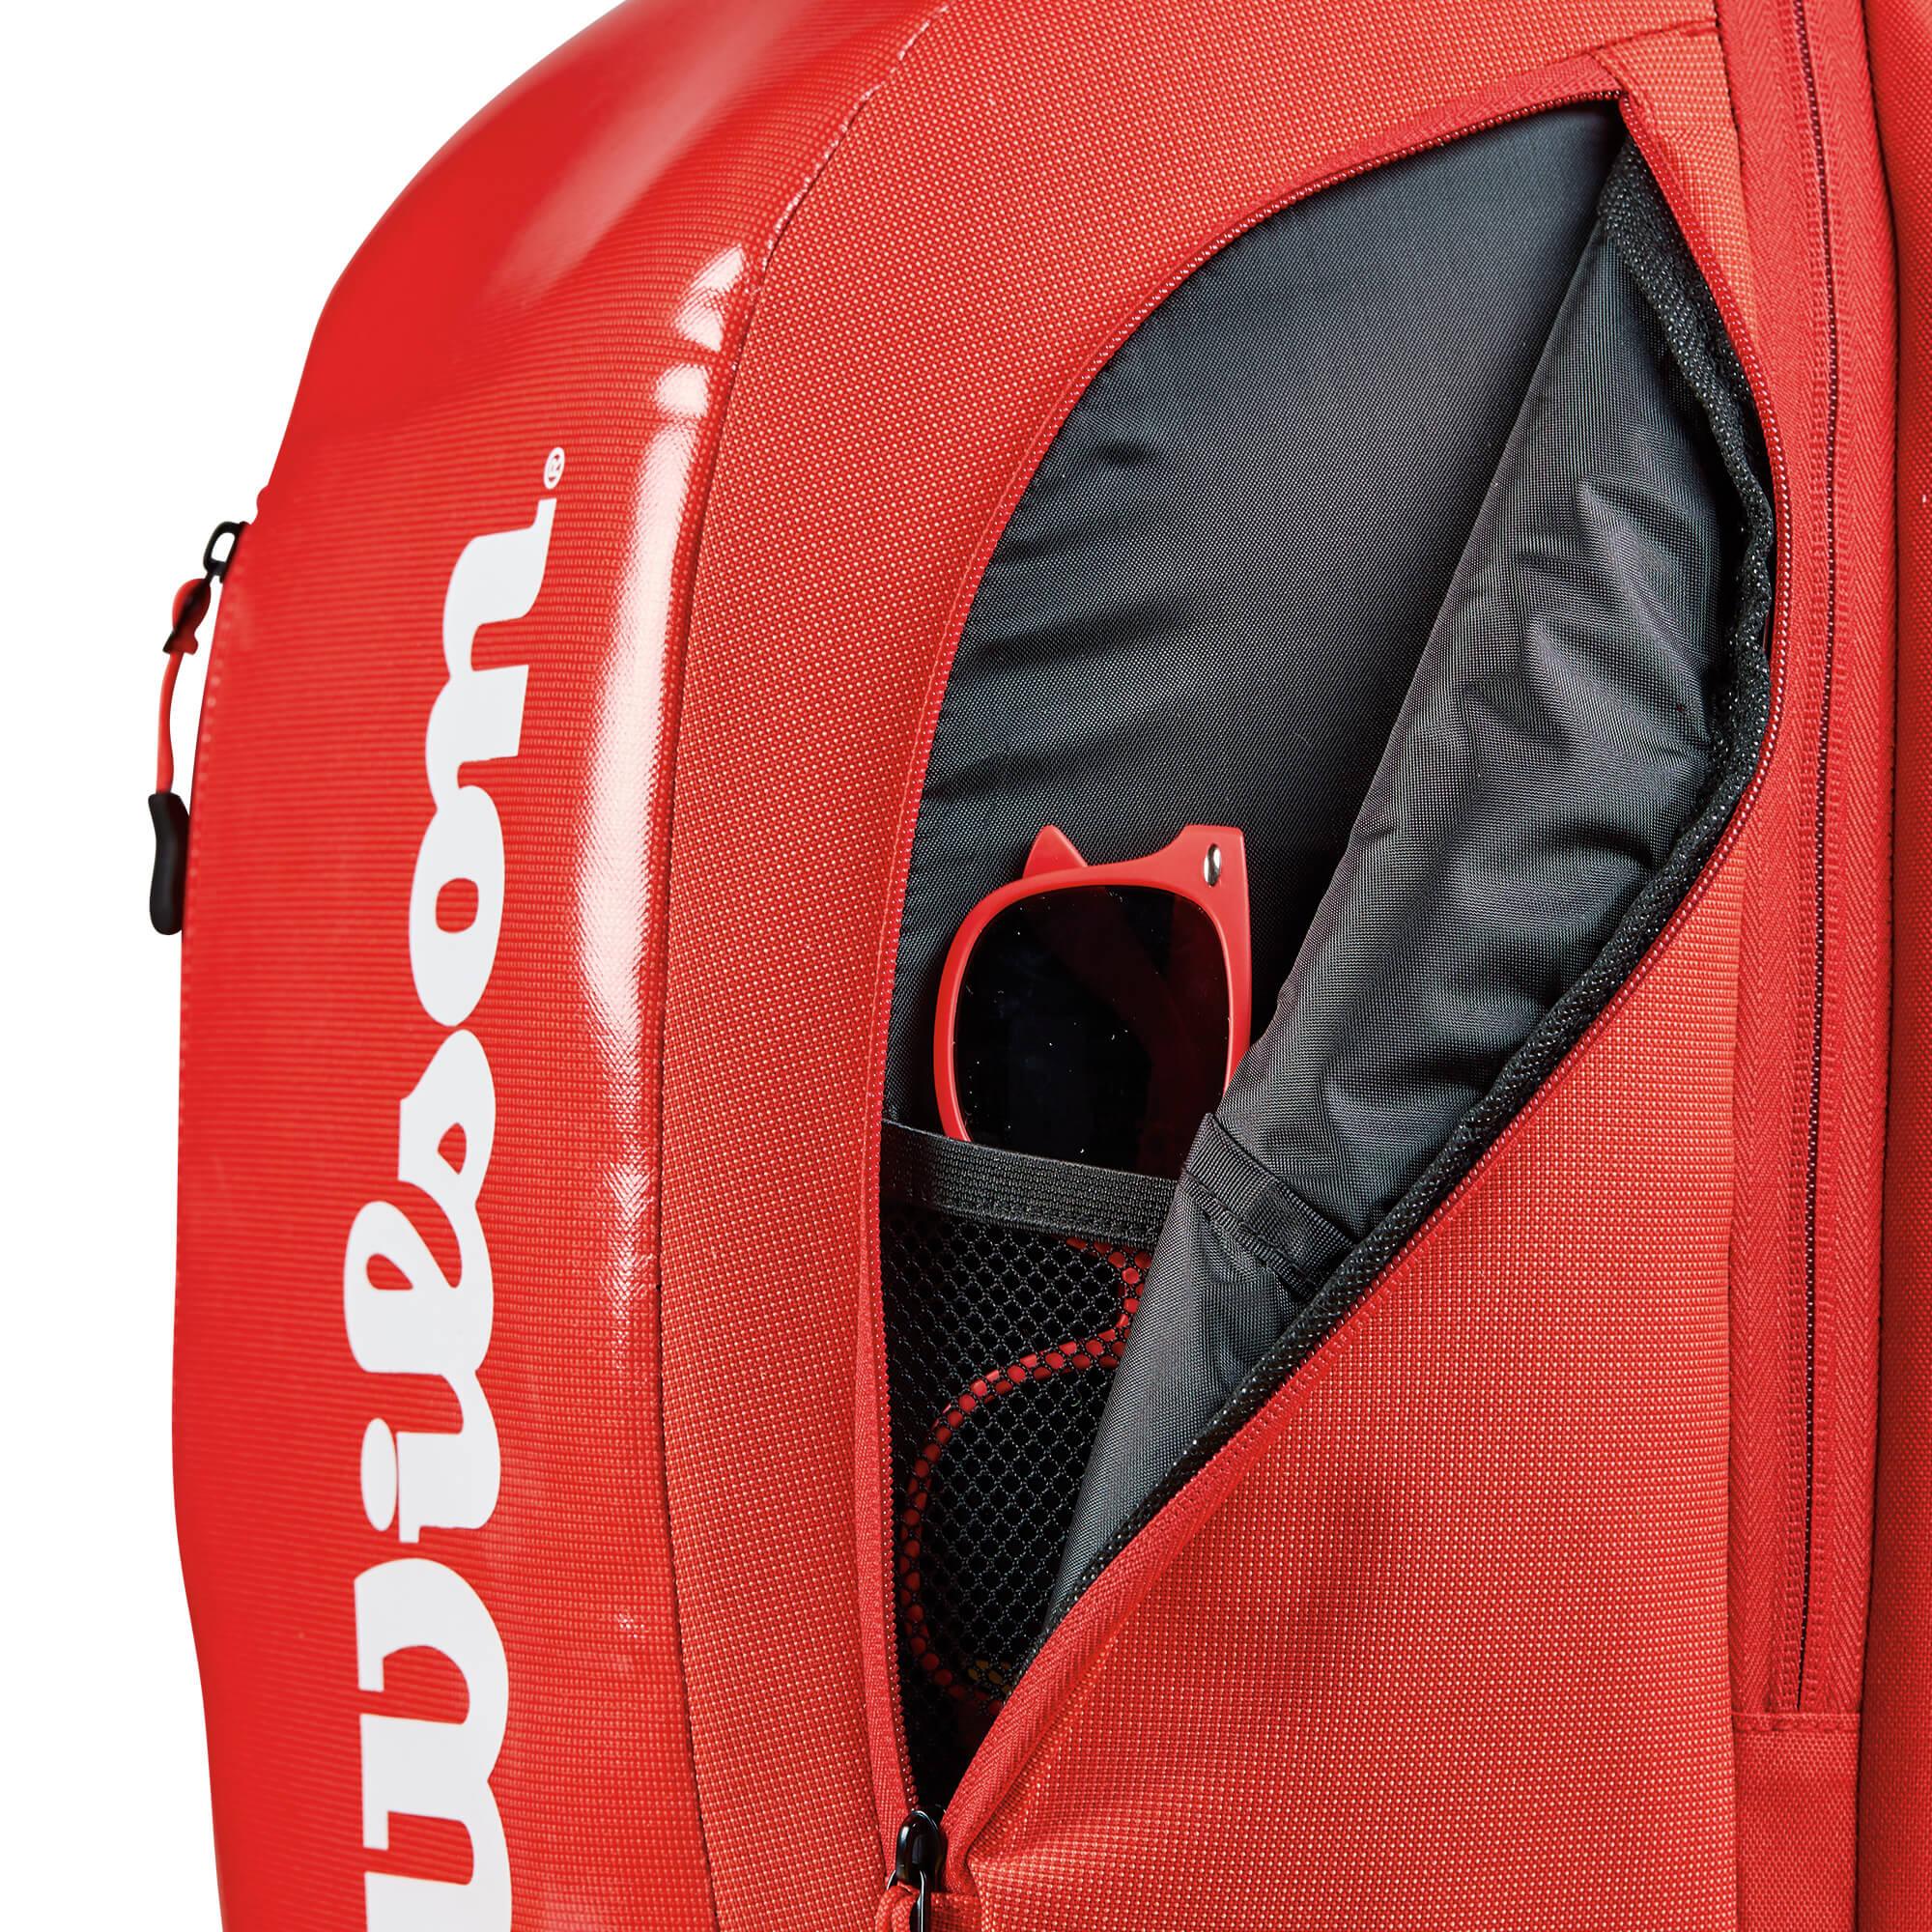 wilson tour backpack red